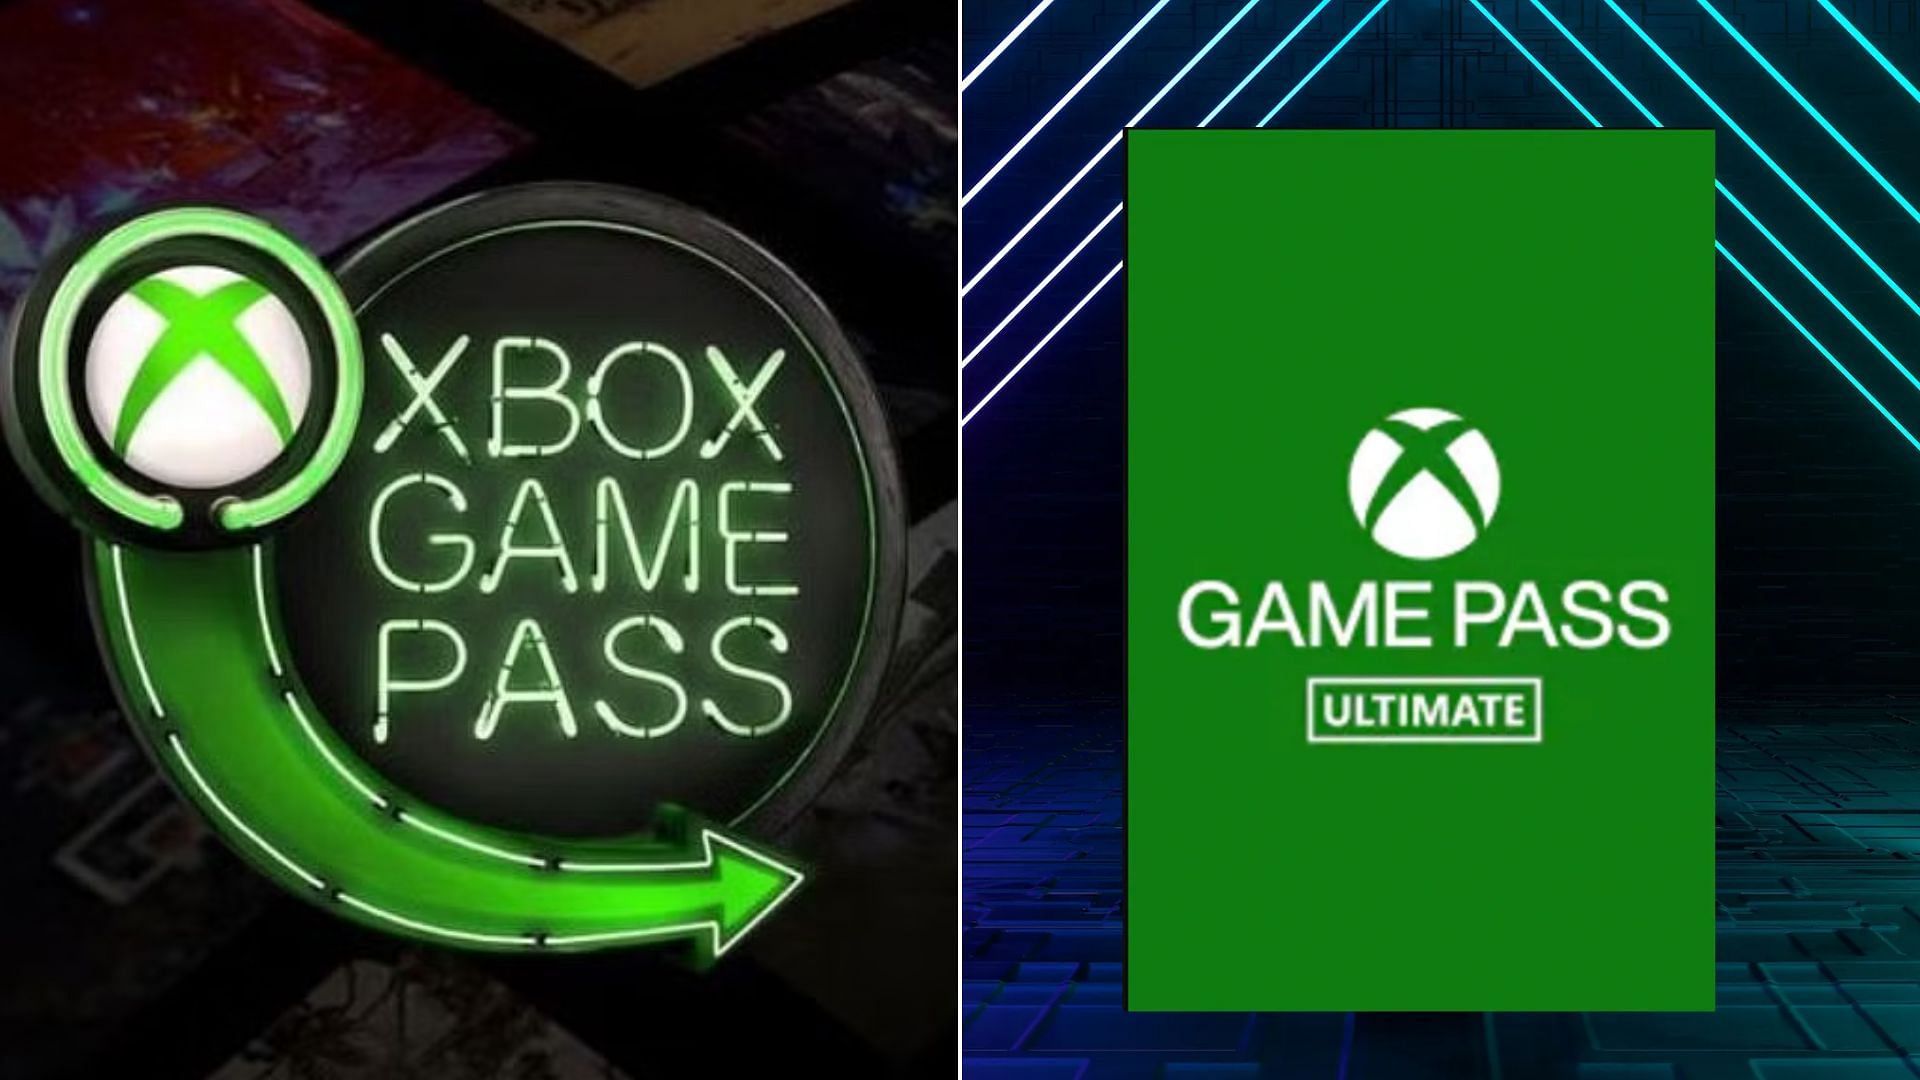 Microsoft is raising Xbox Game Pass prices for console and Ultimate